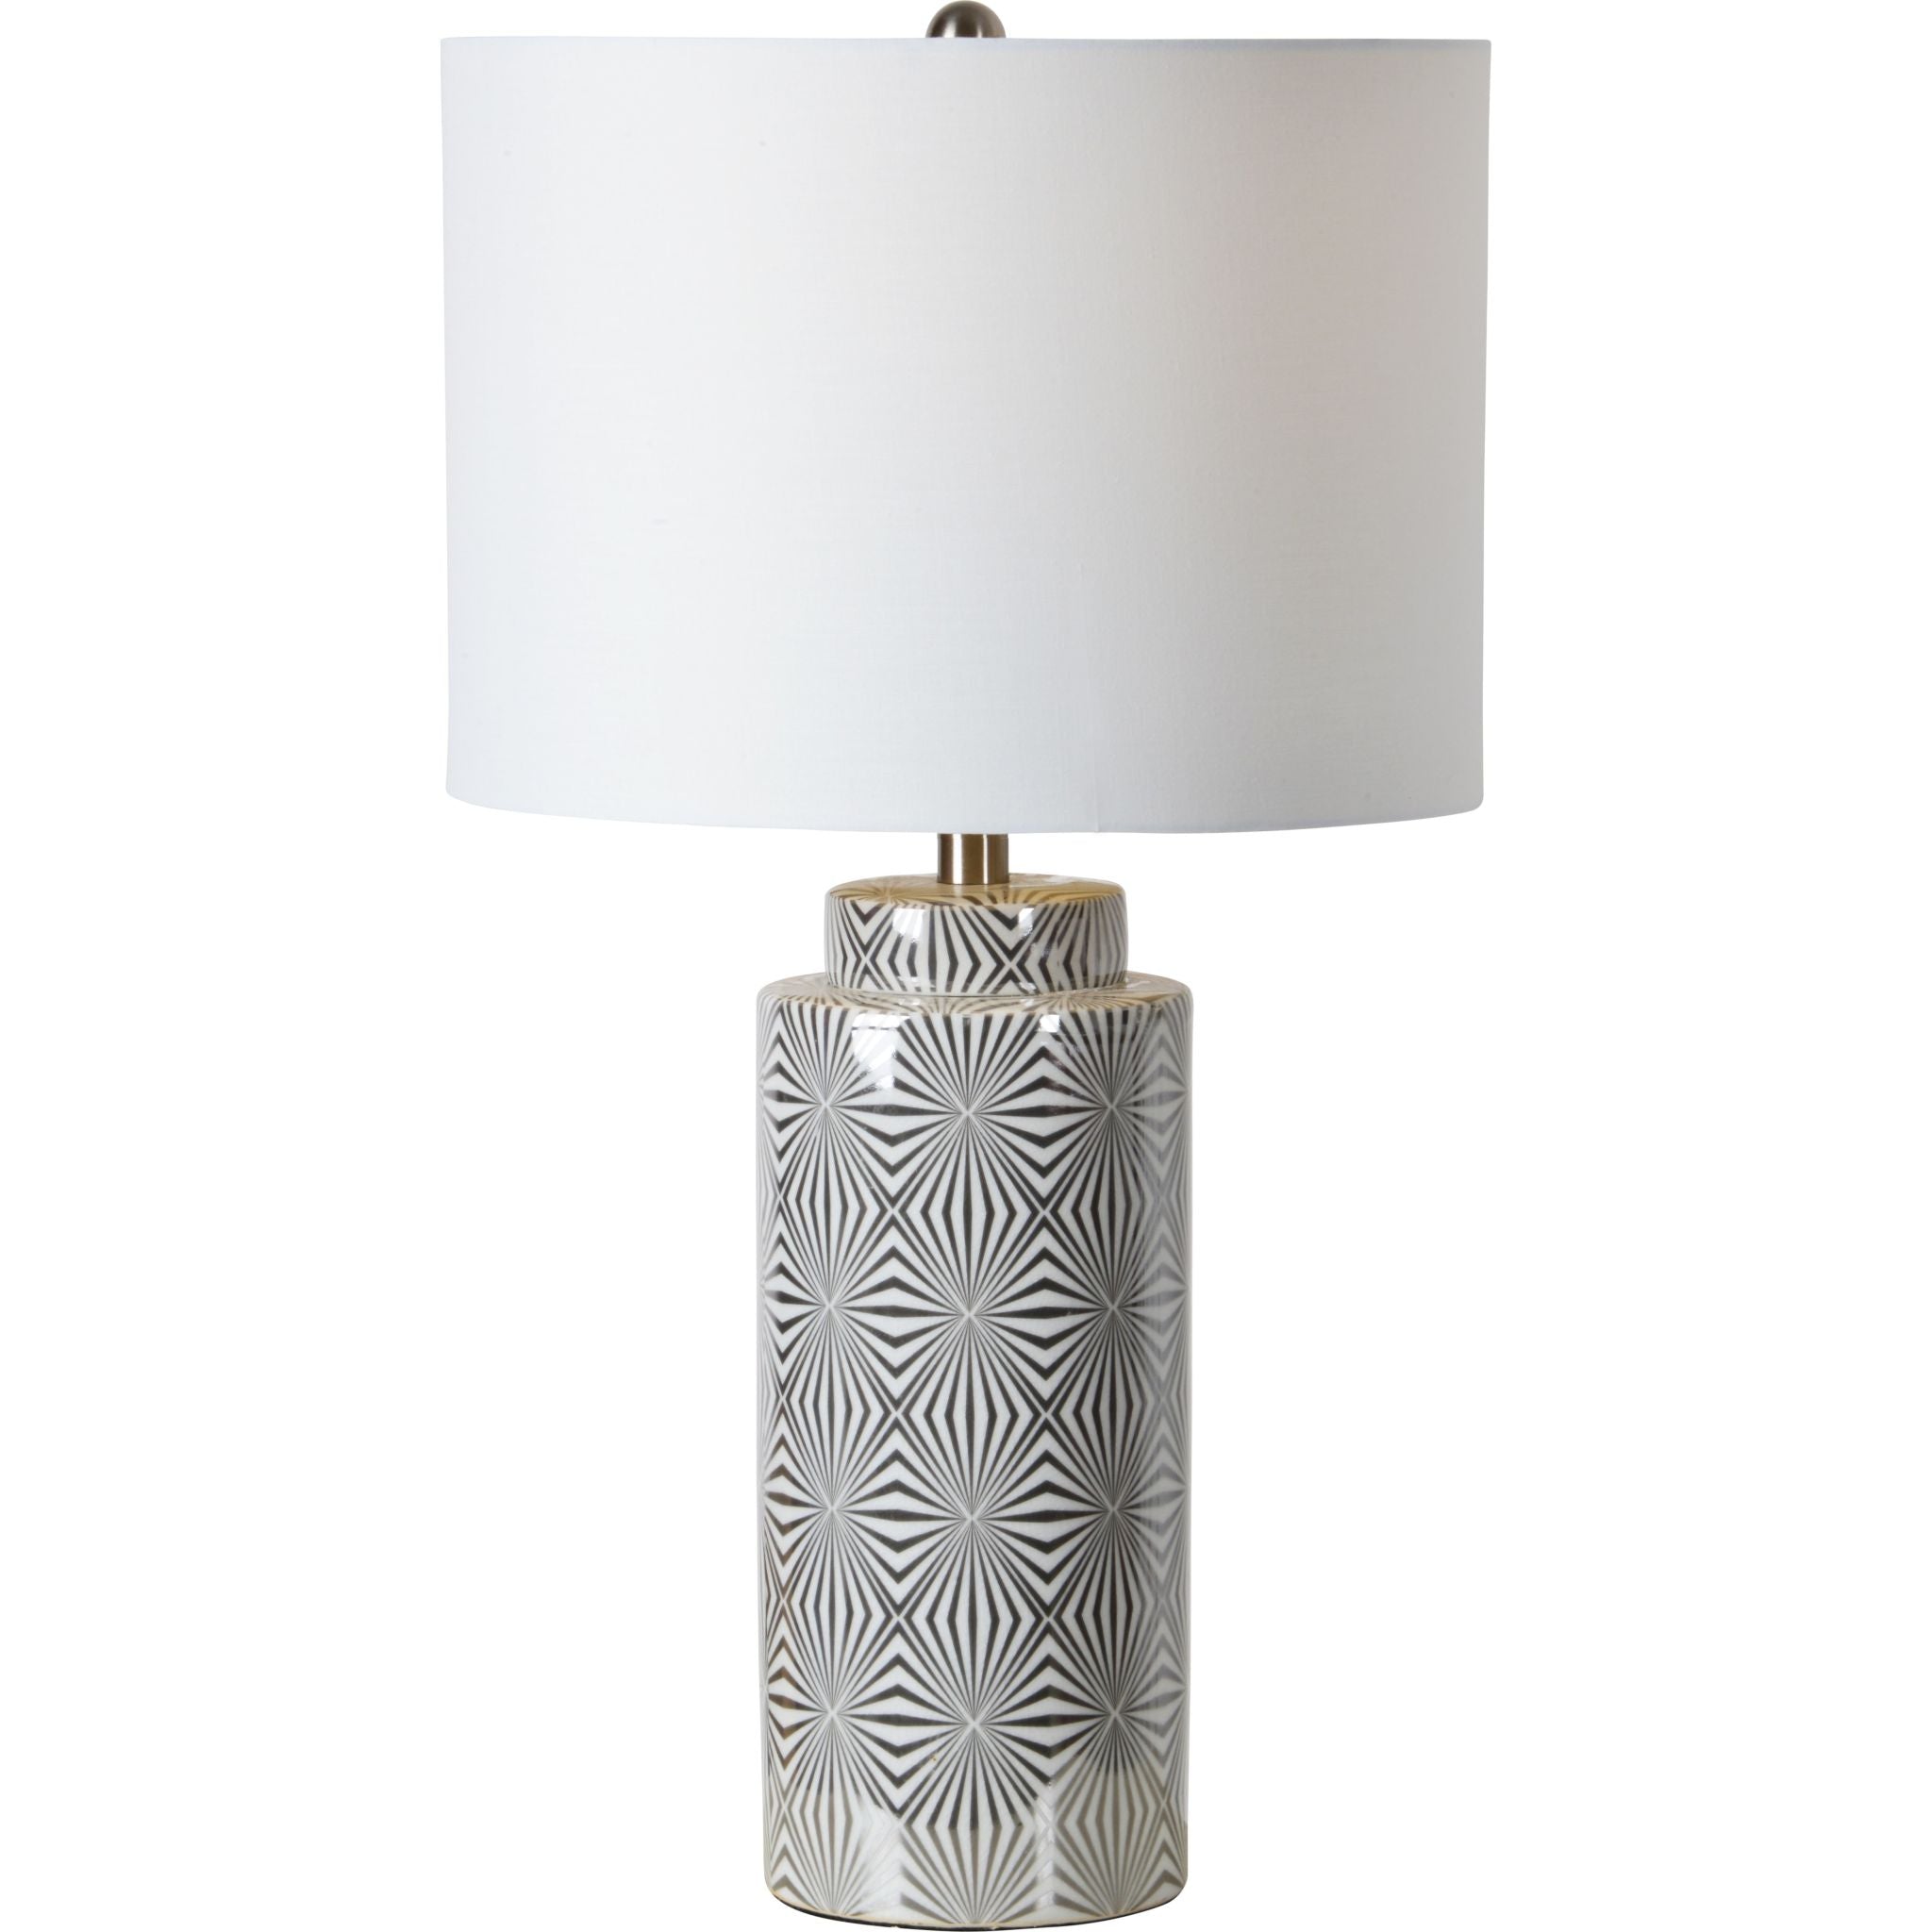 Camden Table Lamp In White, Size: 25" By Ren-Will